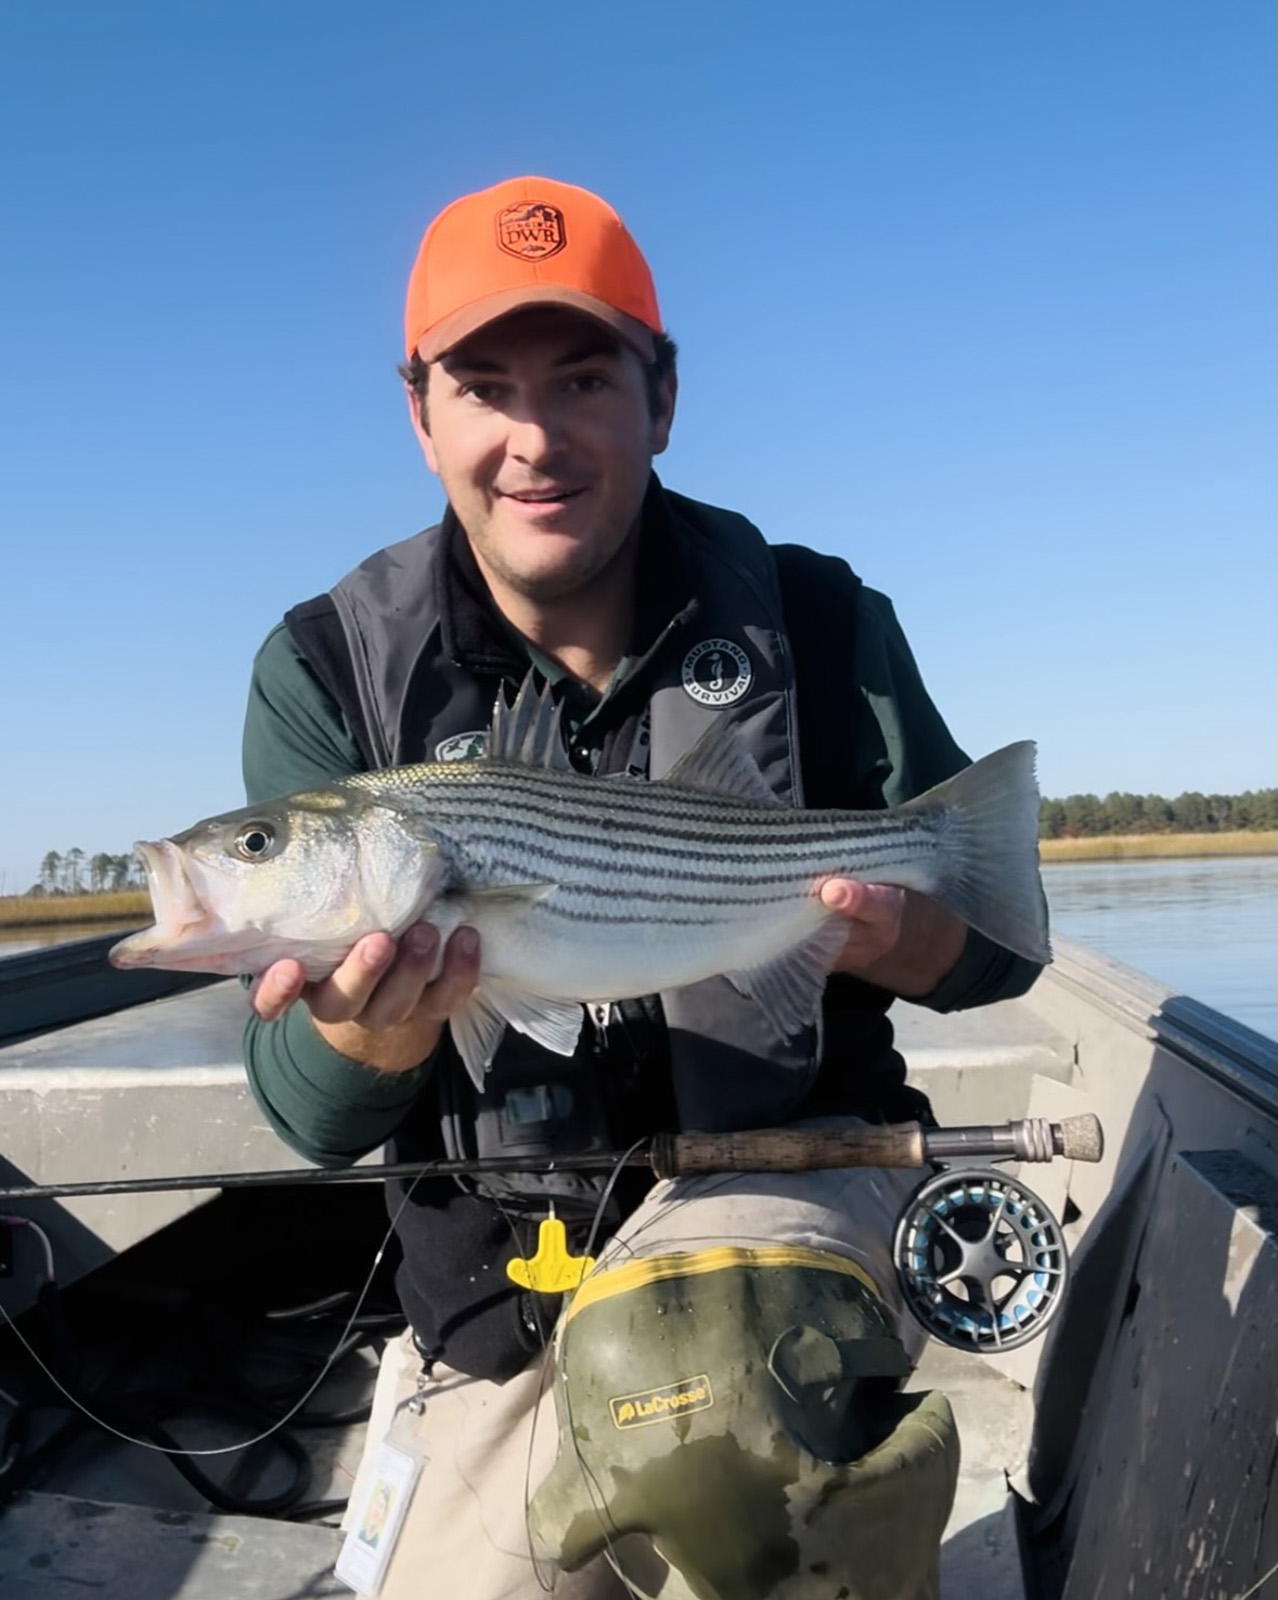 A photo of a man kneeling at the front of a small boat, holding up a striped bass he caught.